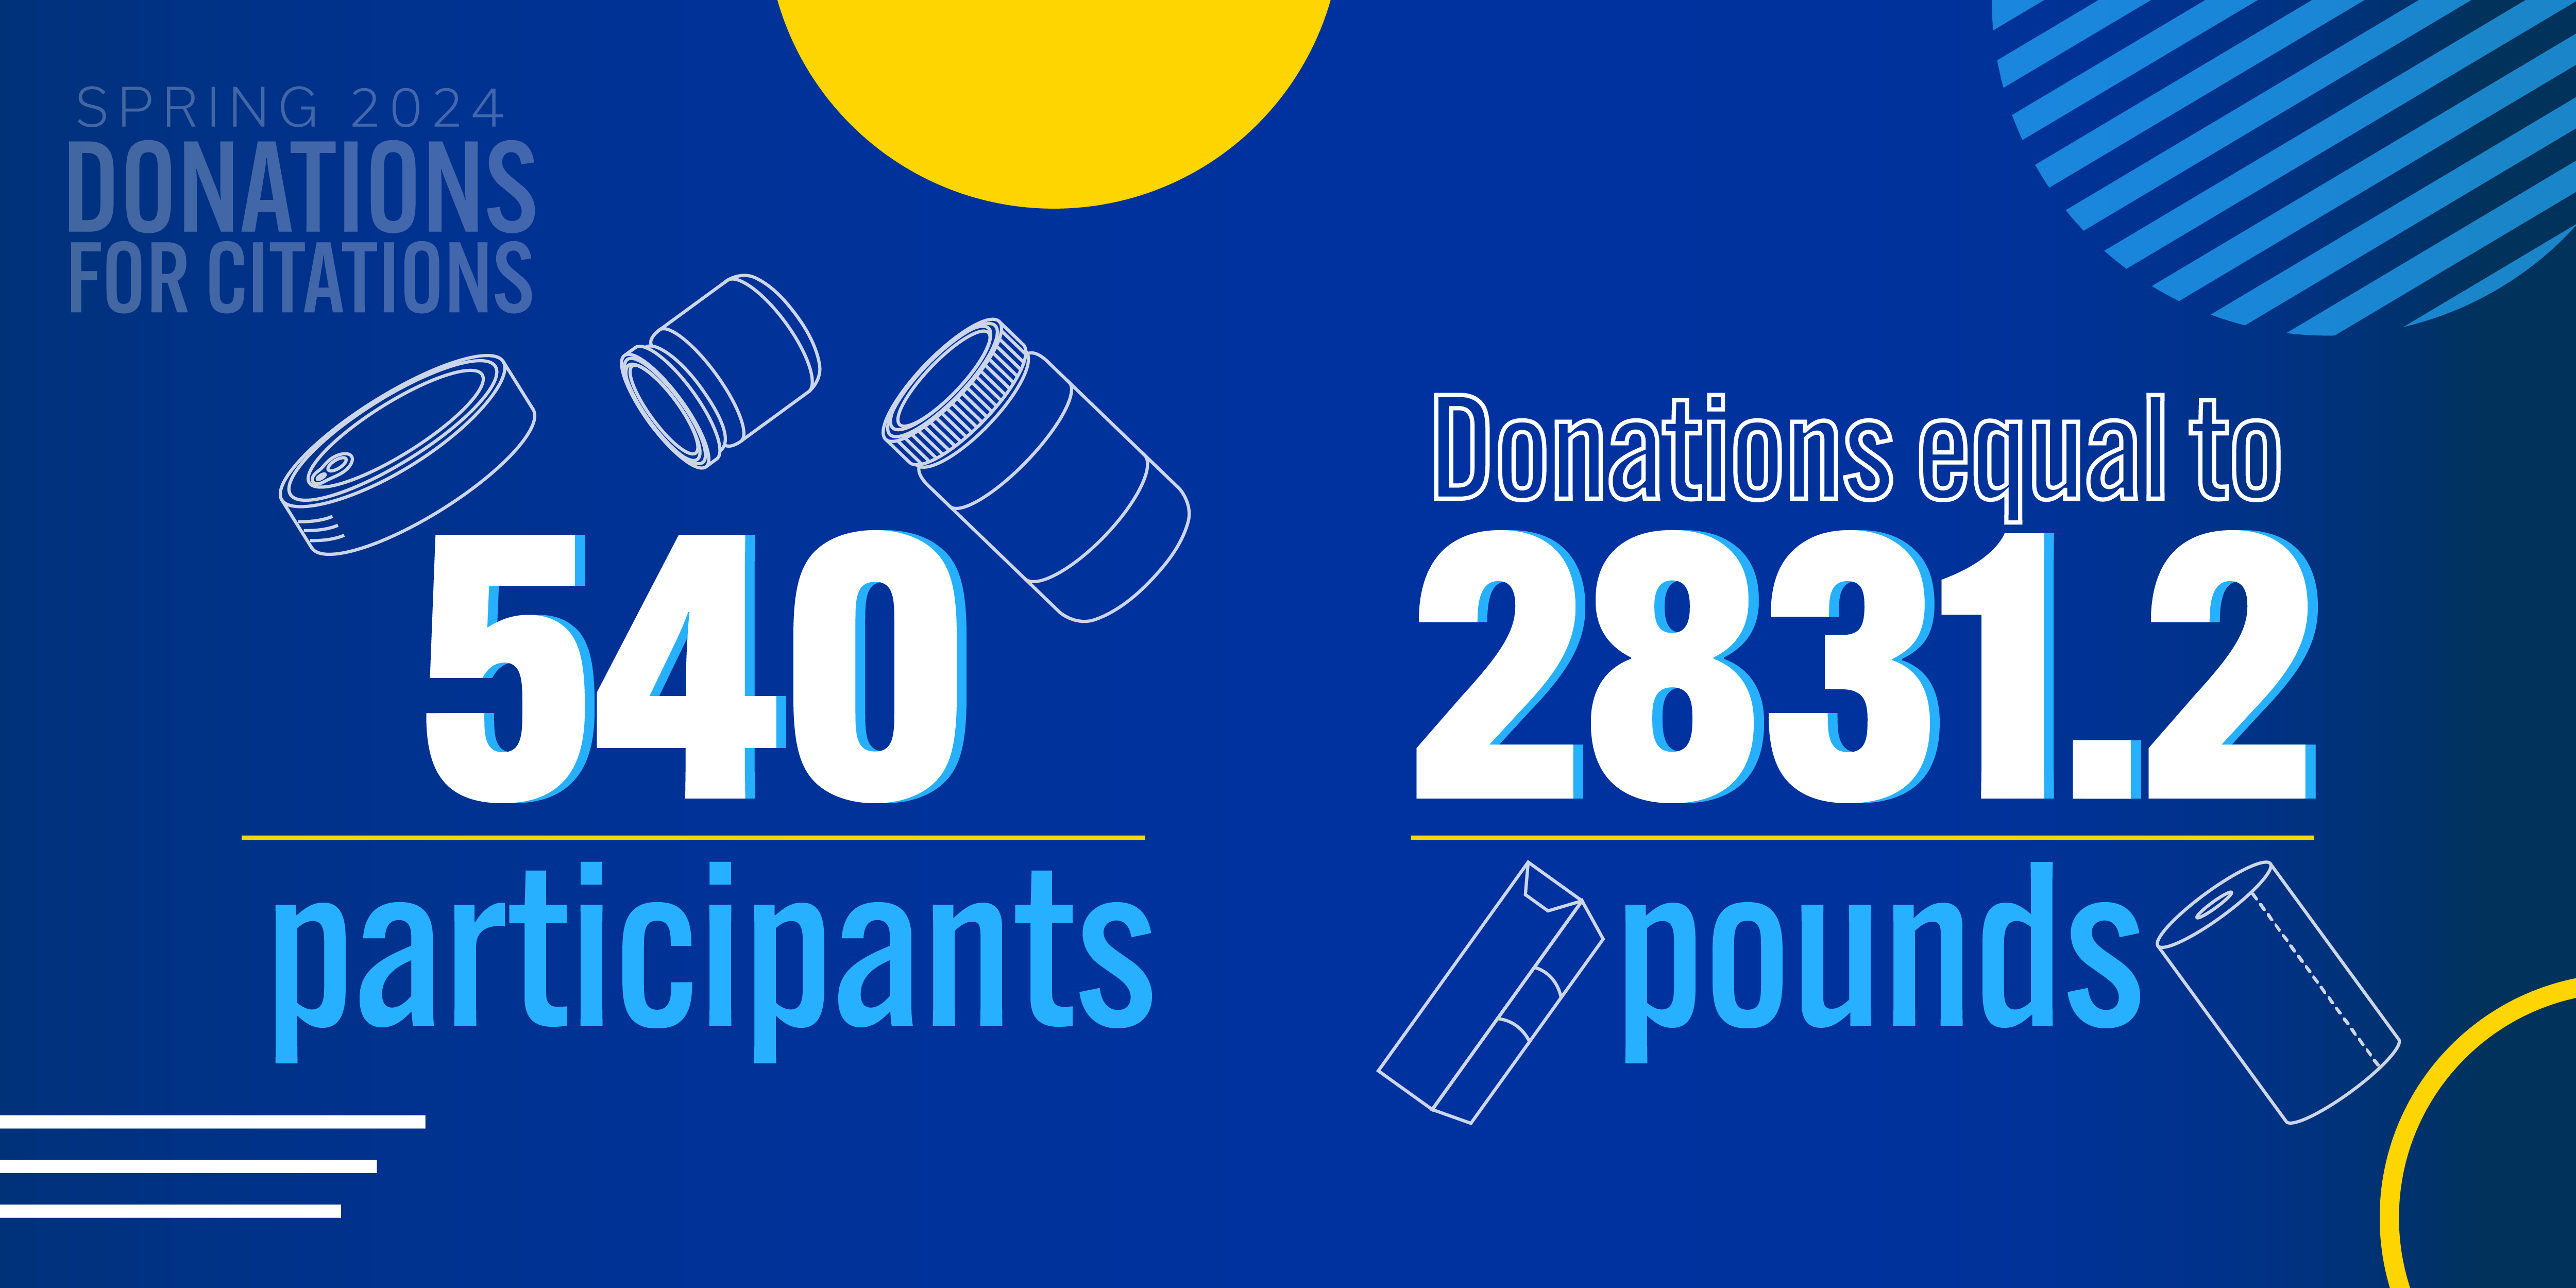 Blue Background with white text stating there were "540 Participants and Donations equal to 2831.2 pounds" for this D4C drive